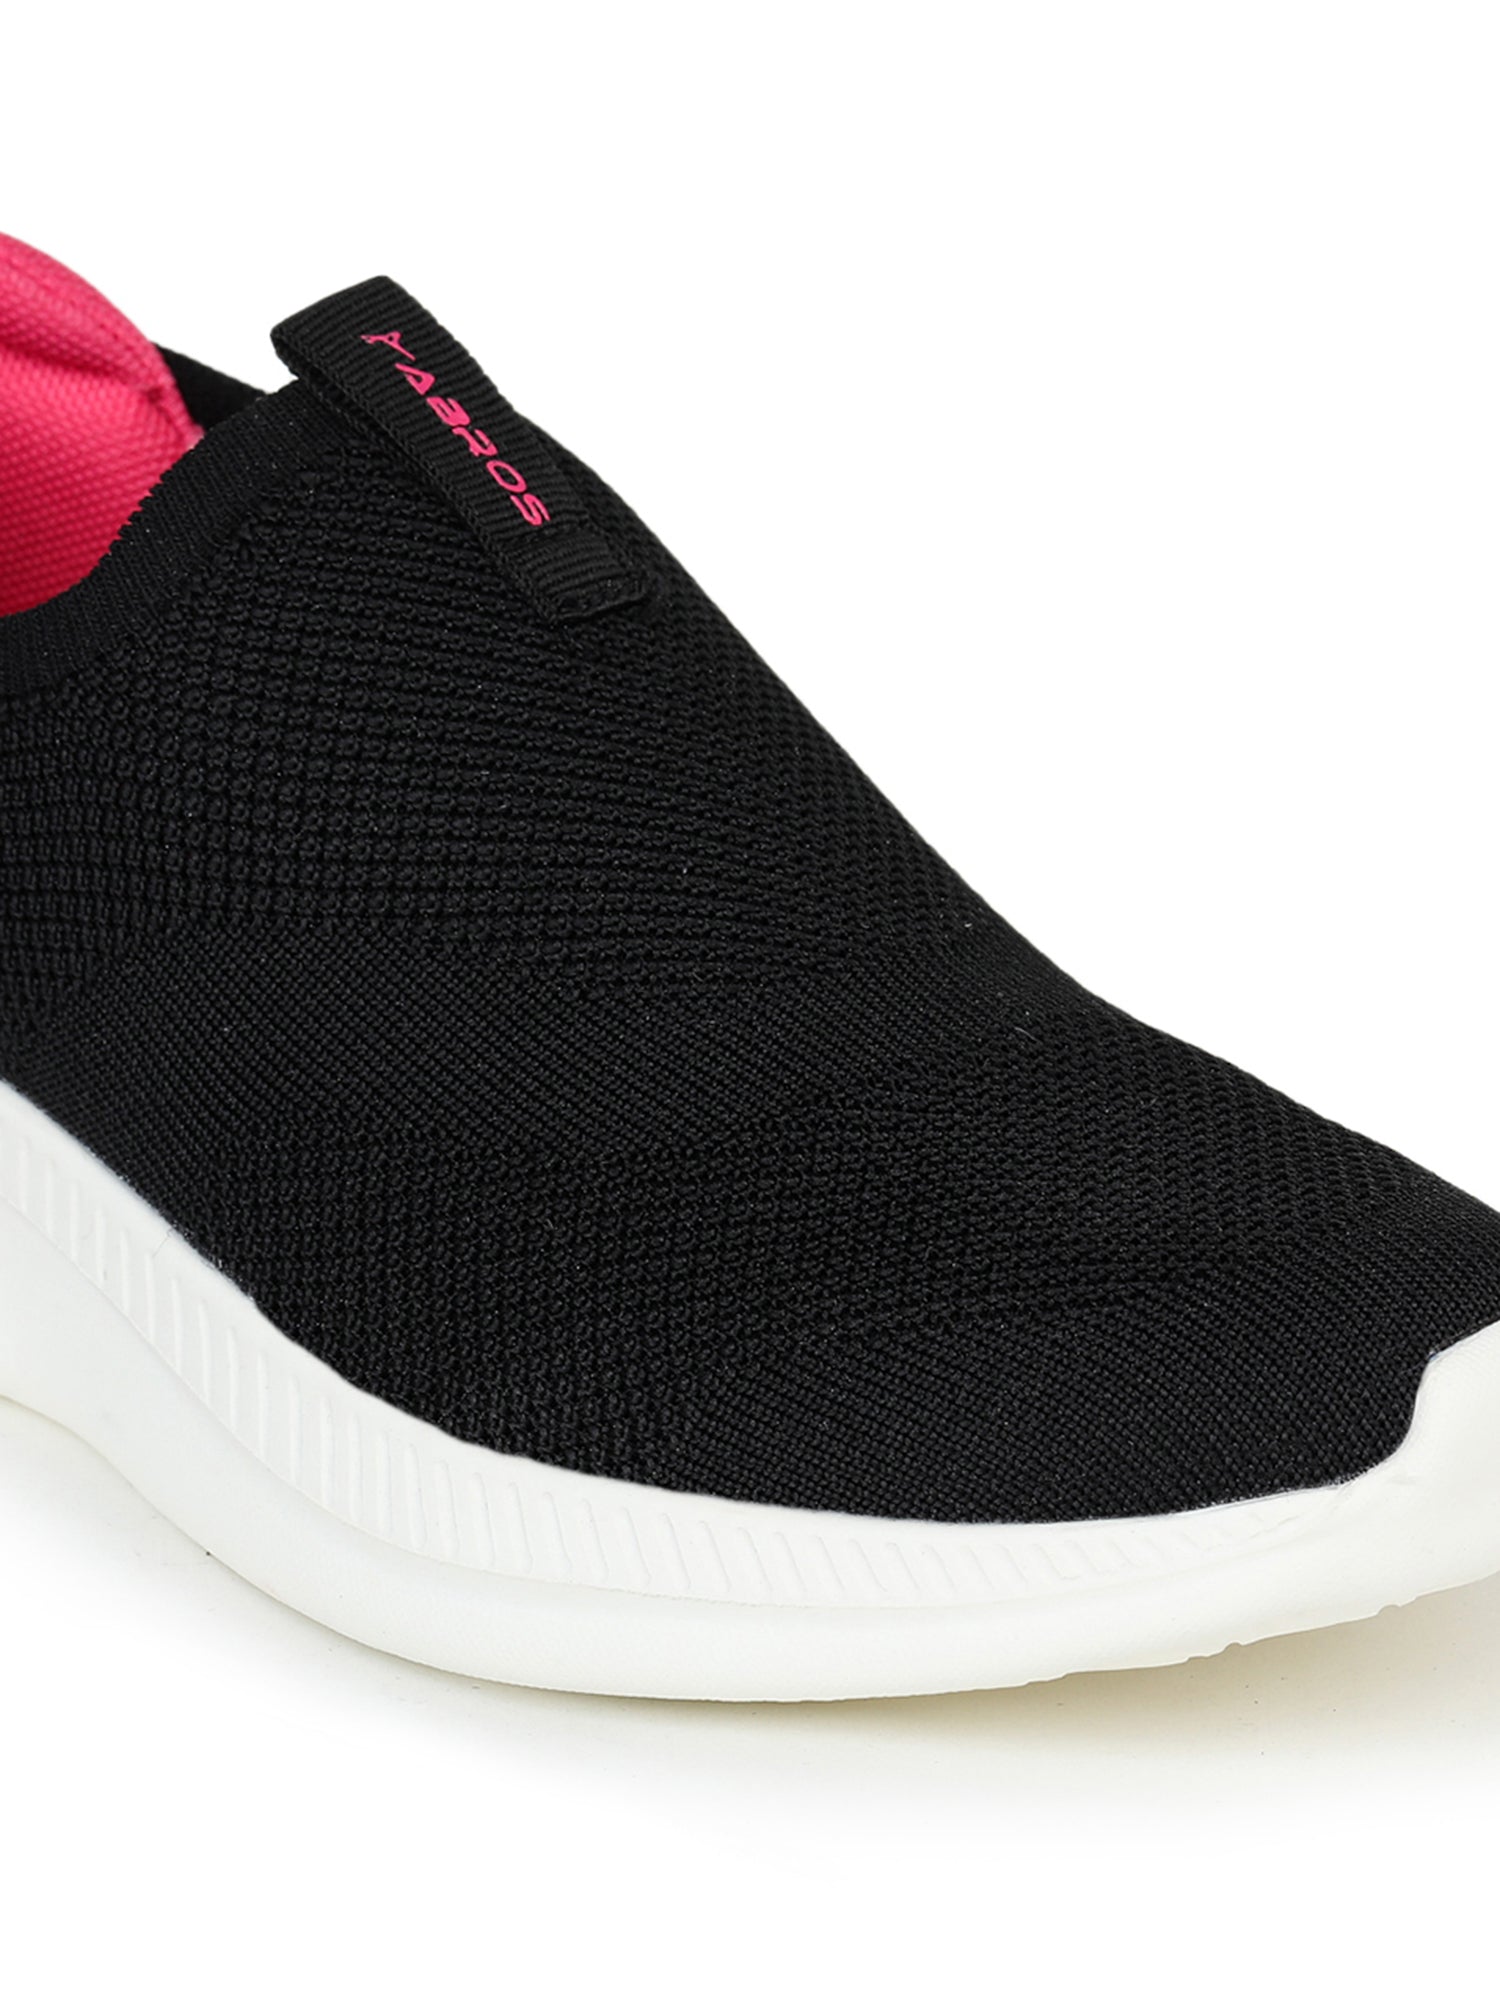 ABROS PERRY SPORTS SHOES FOR WOMEN